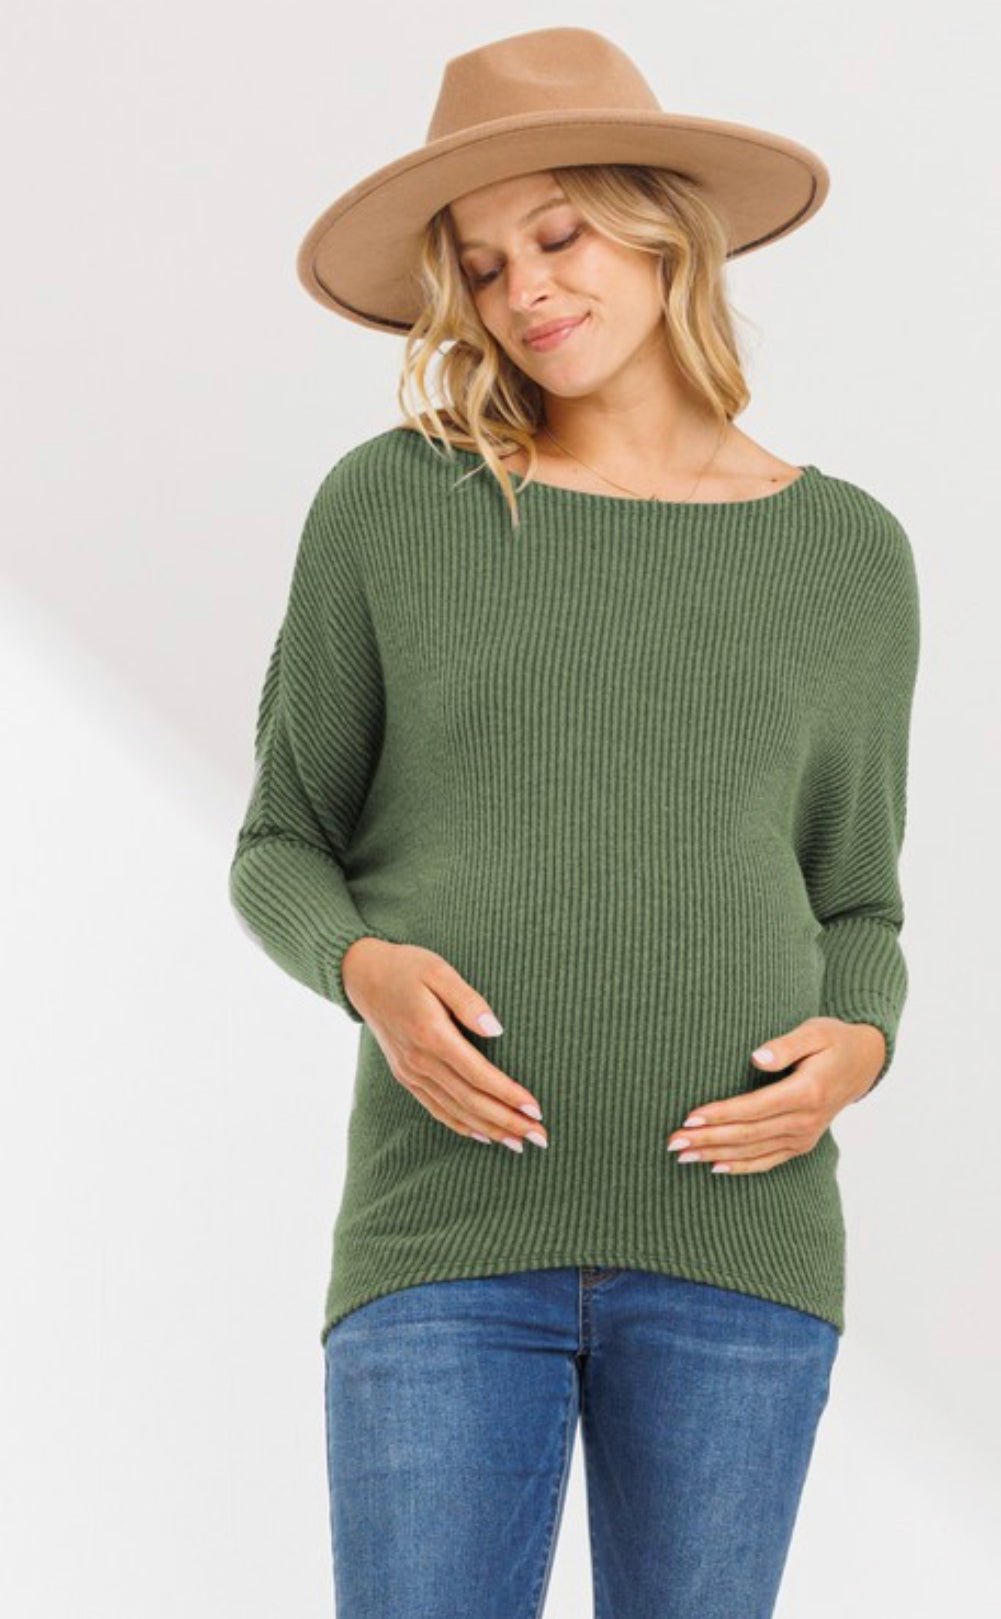 Olive Sweater Weather Top - The Bump & Company LLC